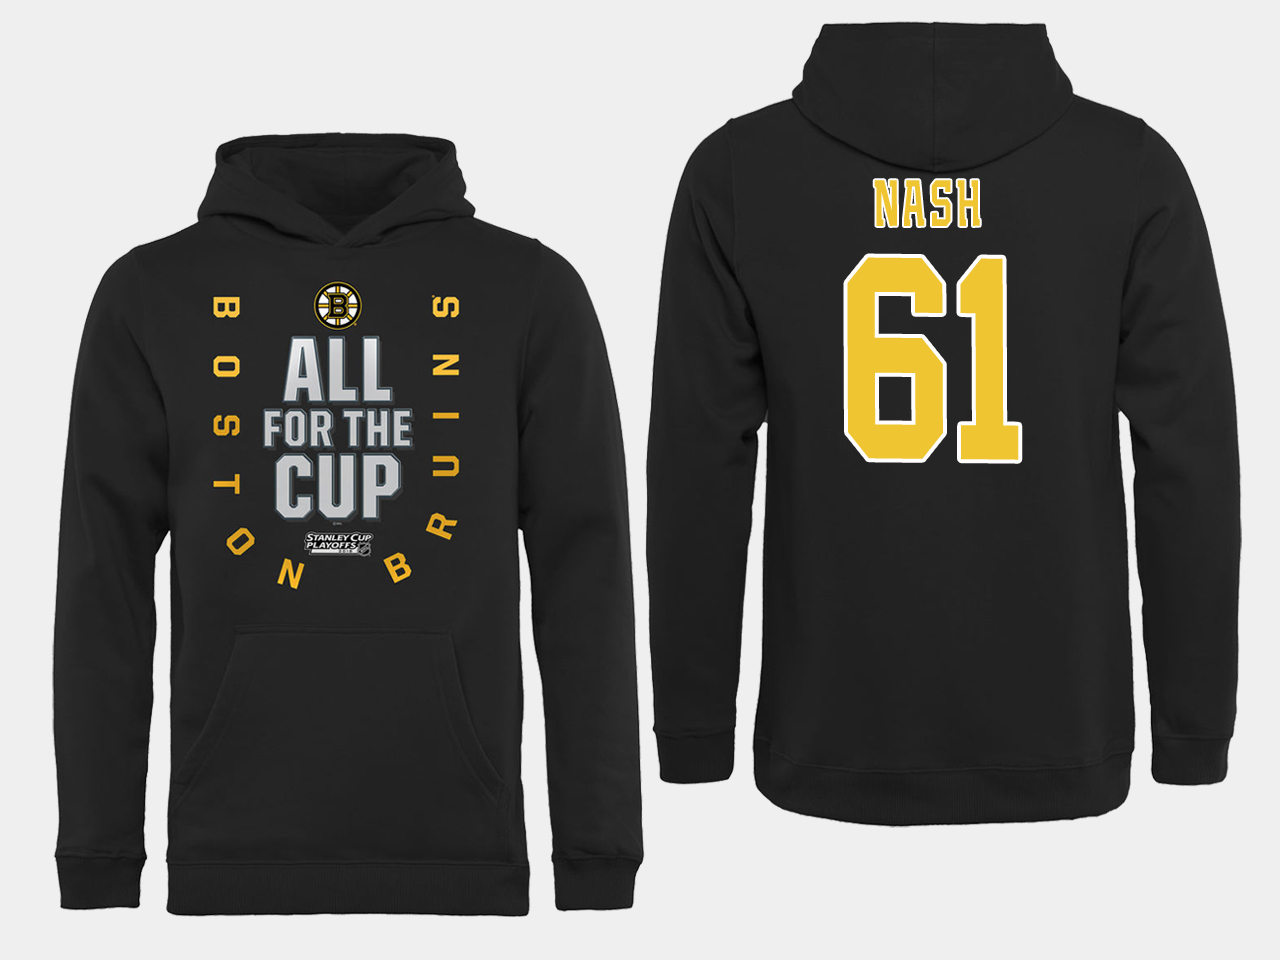 NHL Men Boston Bruins 61 Nash Black All for the Cup Hoodie